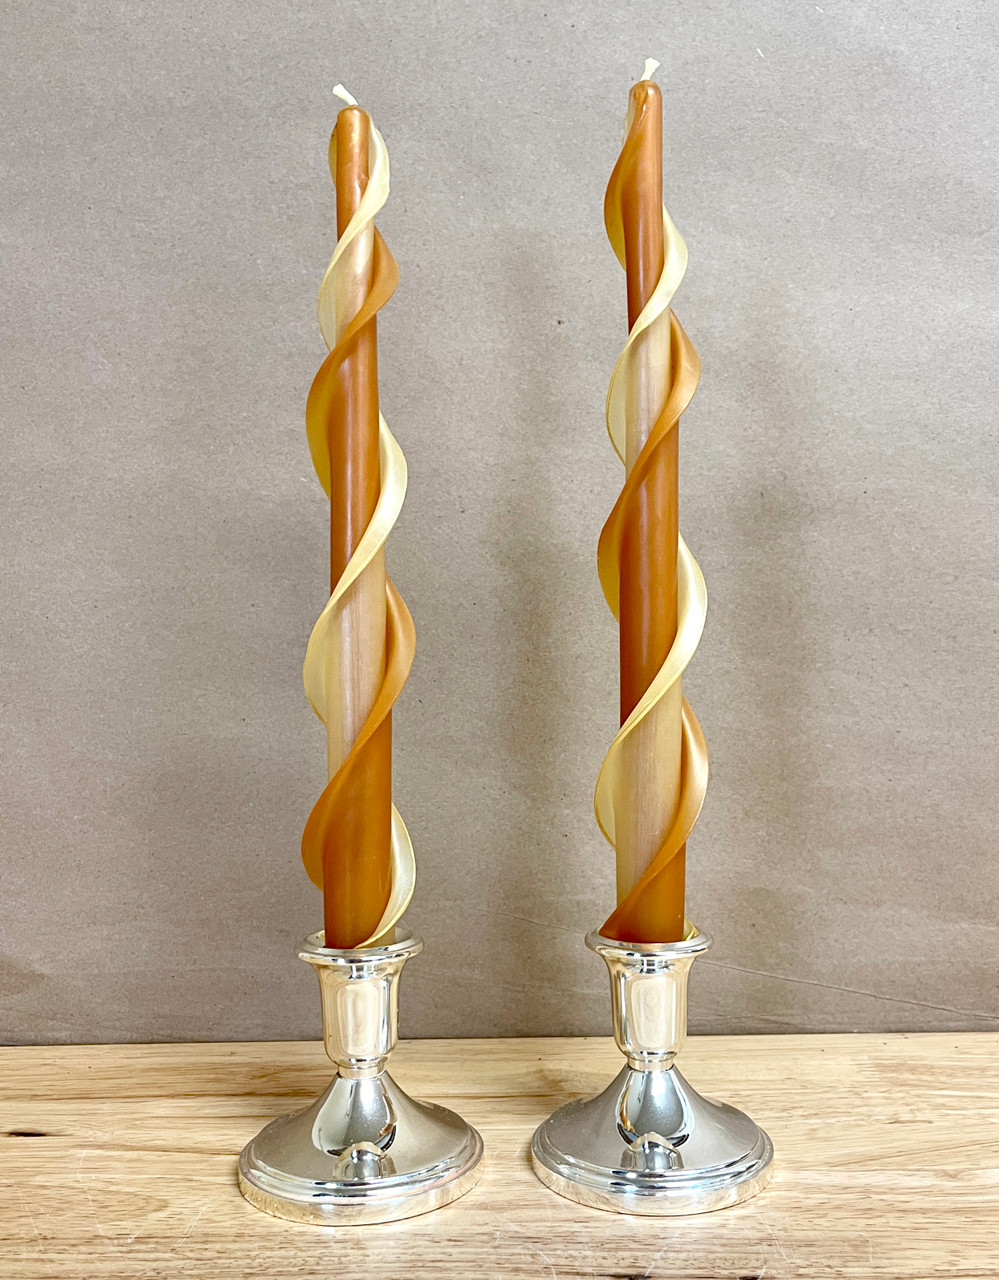 6 Beeswax Taper Candles (1-pair)